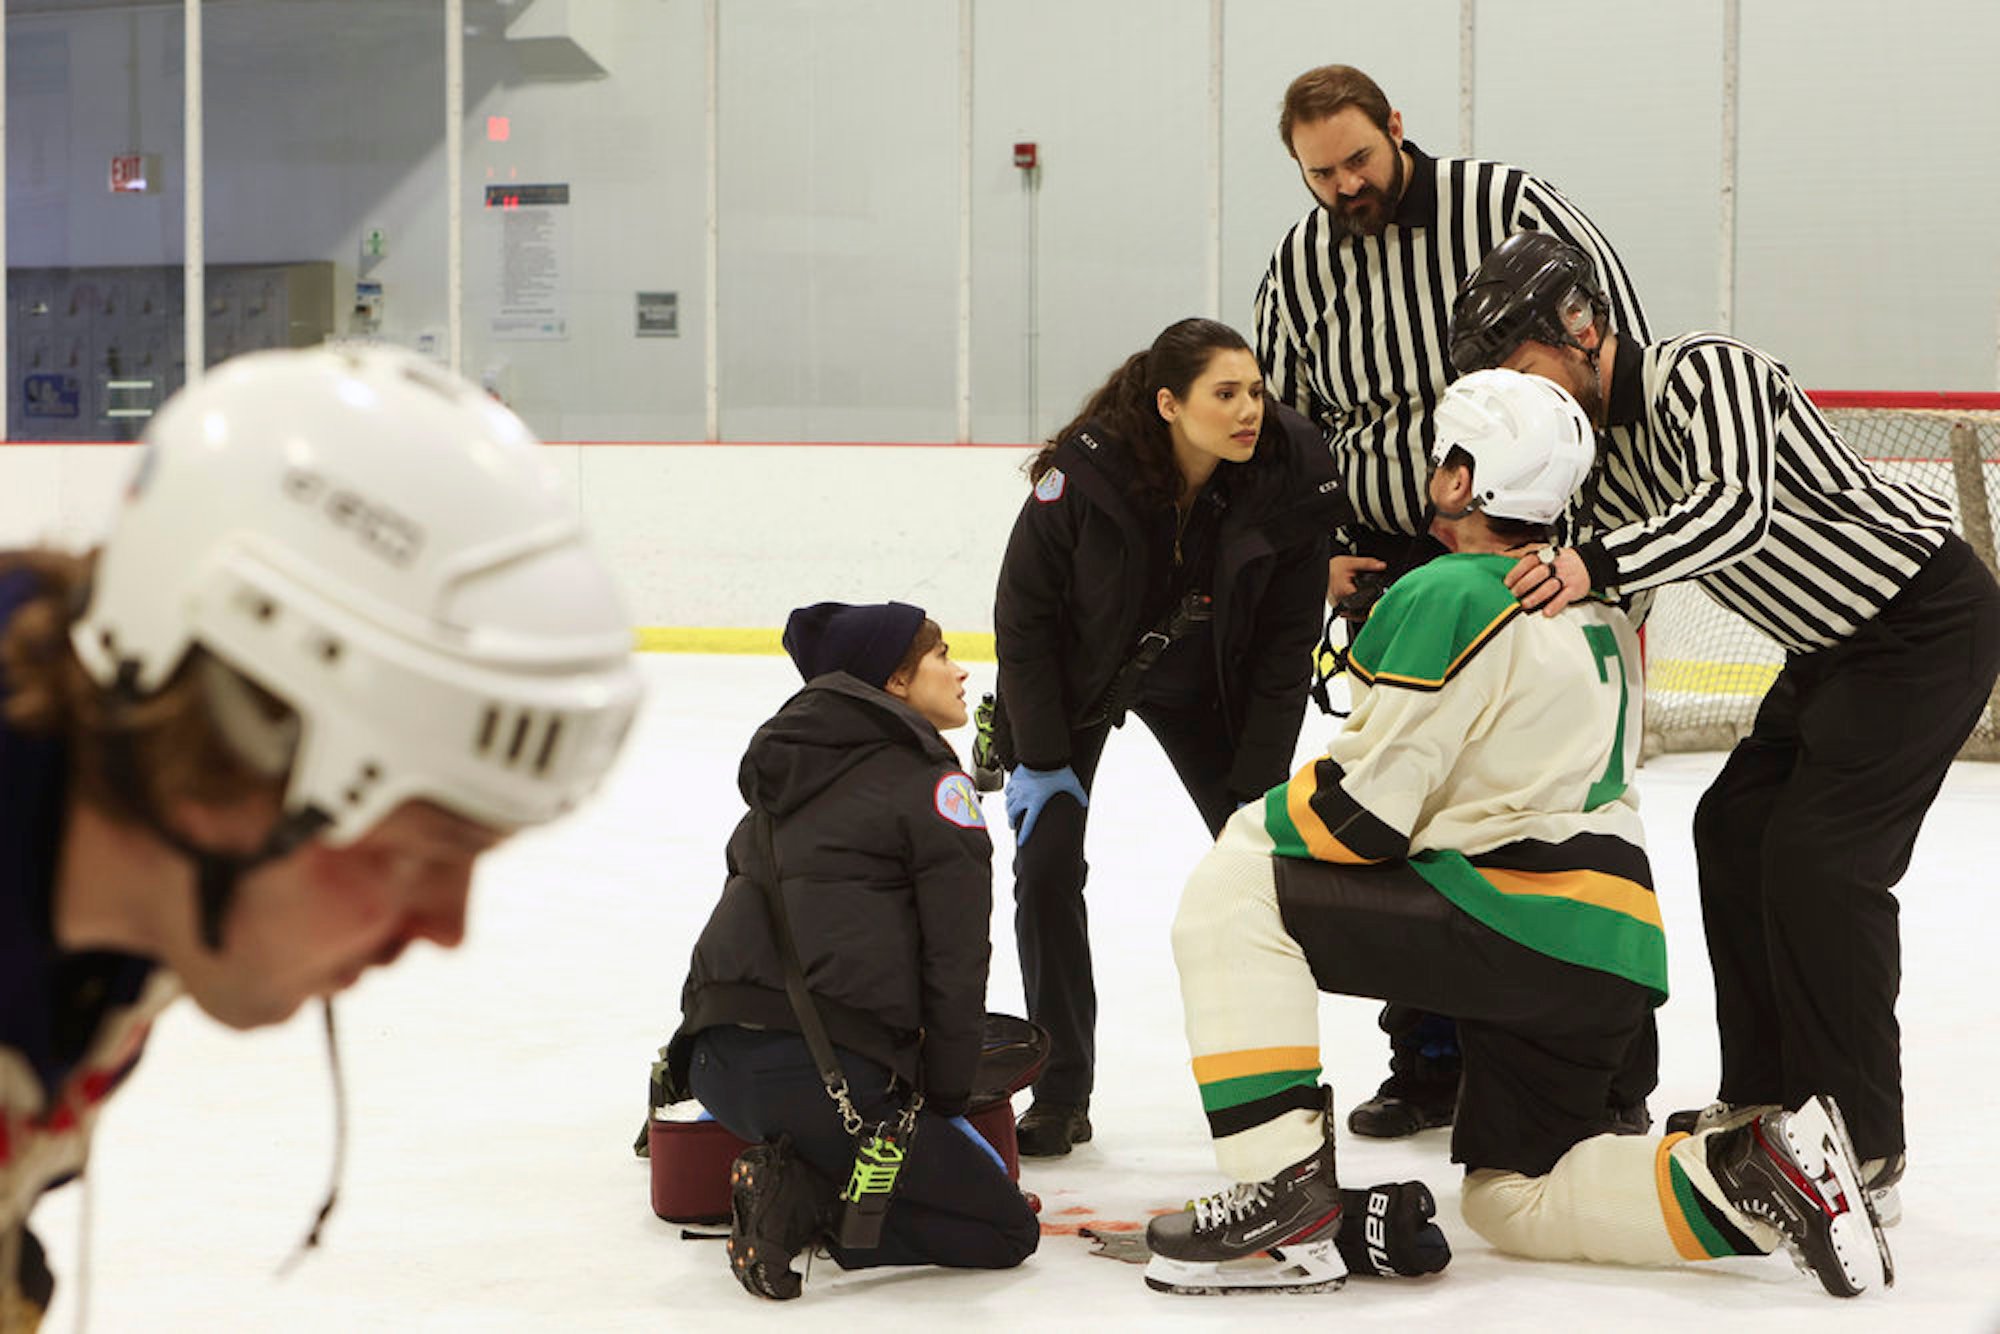 Emma Jacobs and Violet Mikami treating an ice hockey player in 'Chicago Fire' Season 17